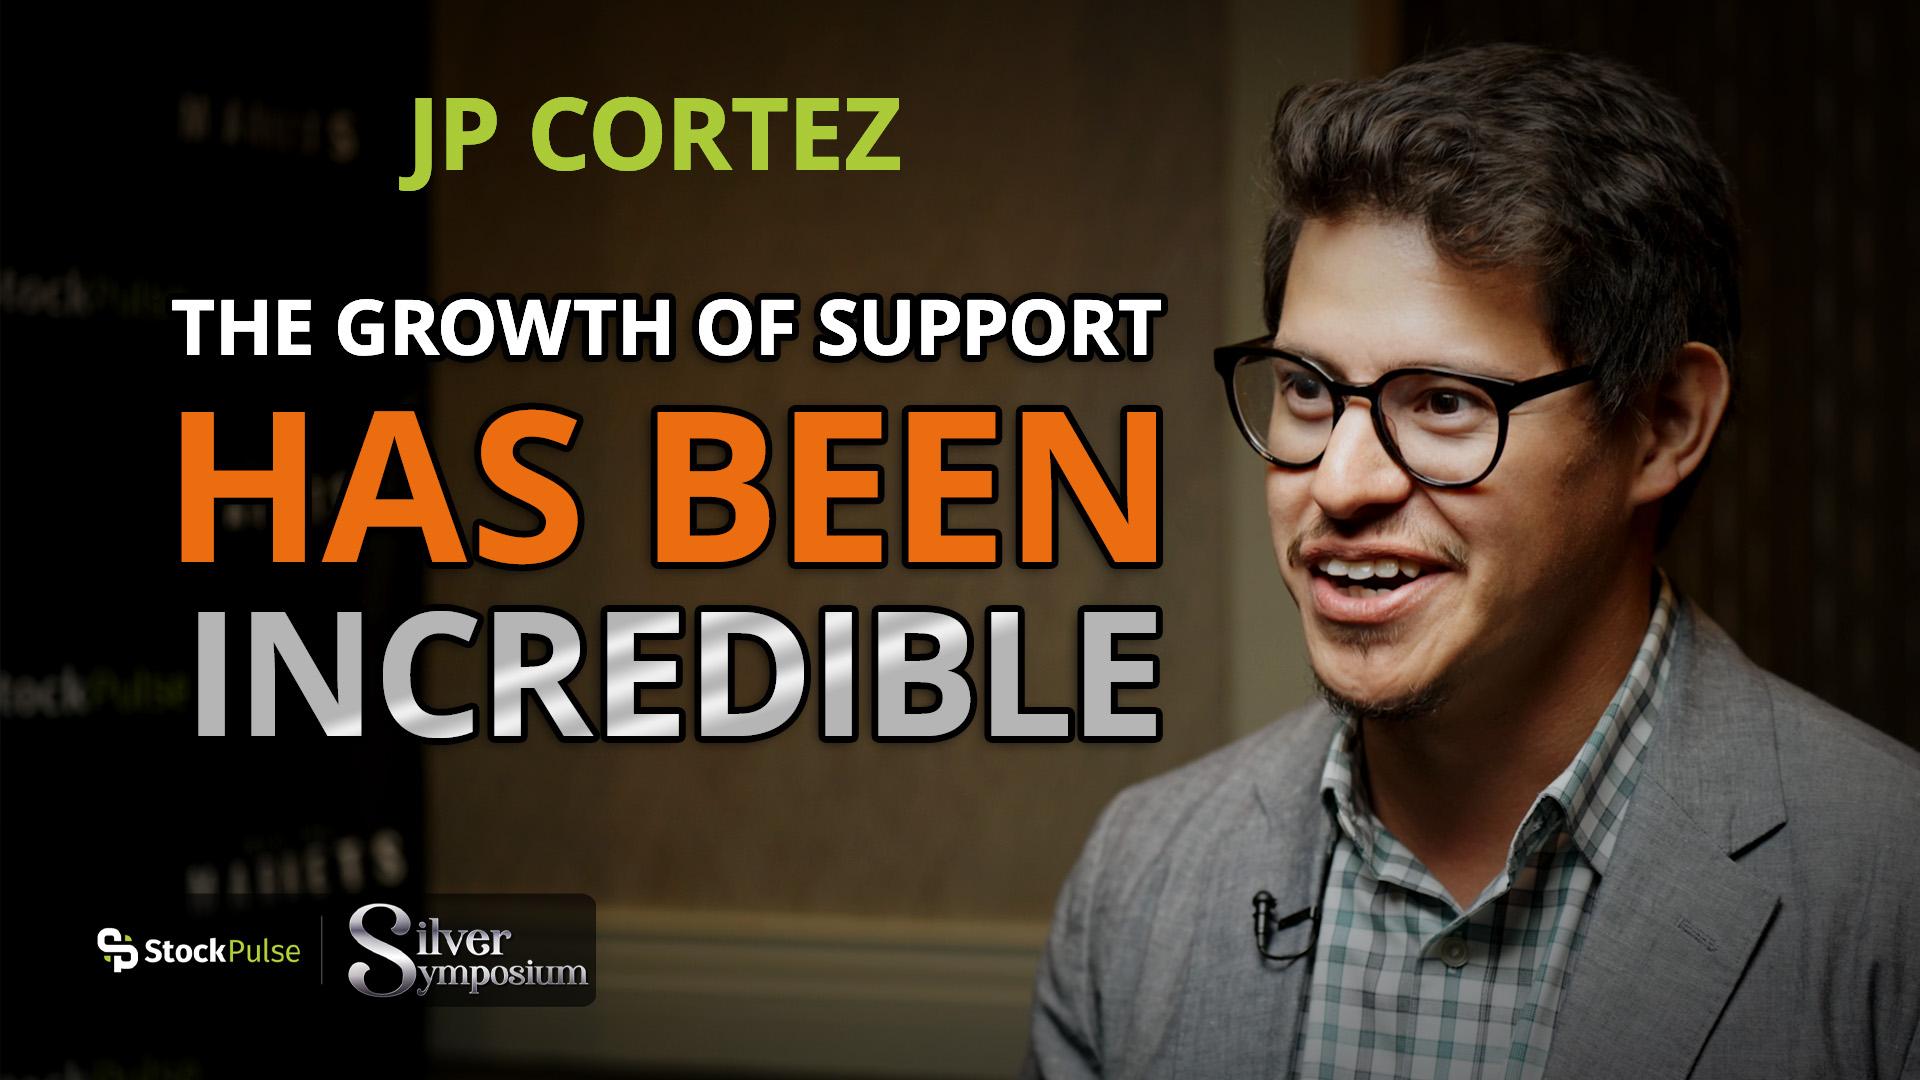 Jp Cortez: The Growth of Support Has Been Incredible